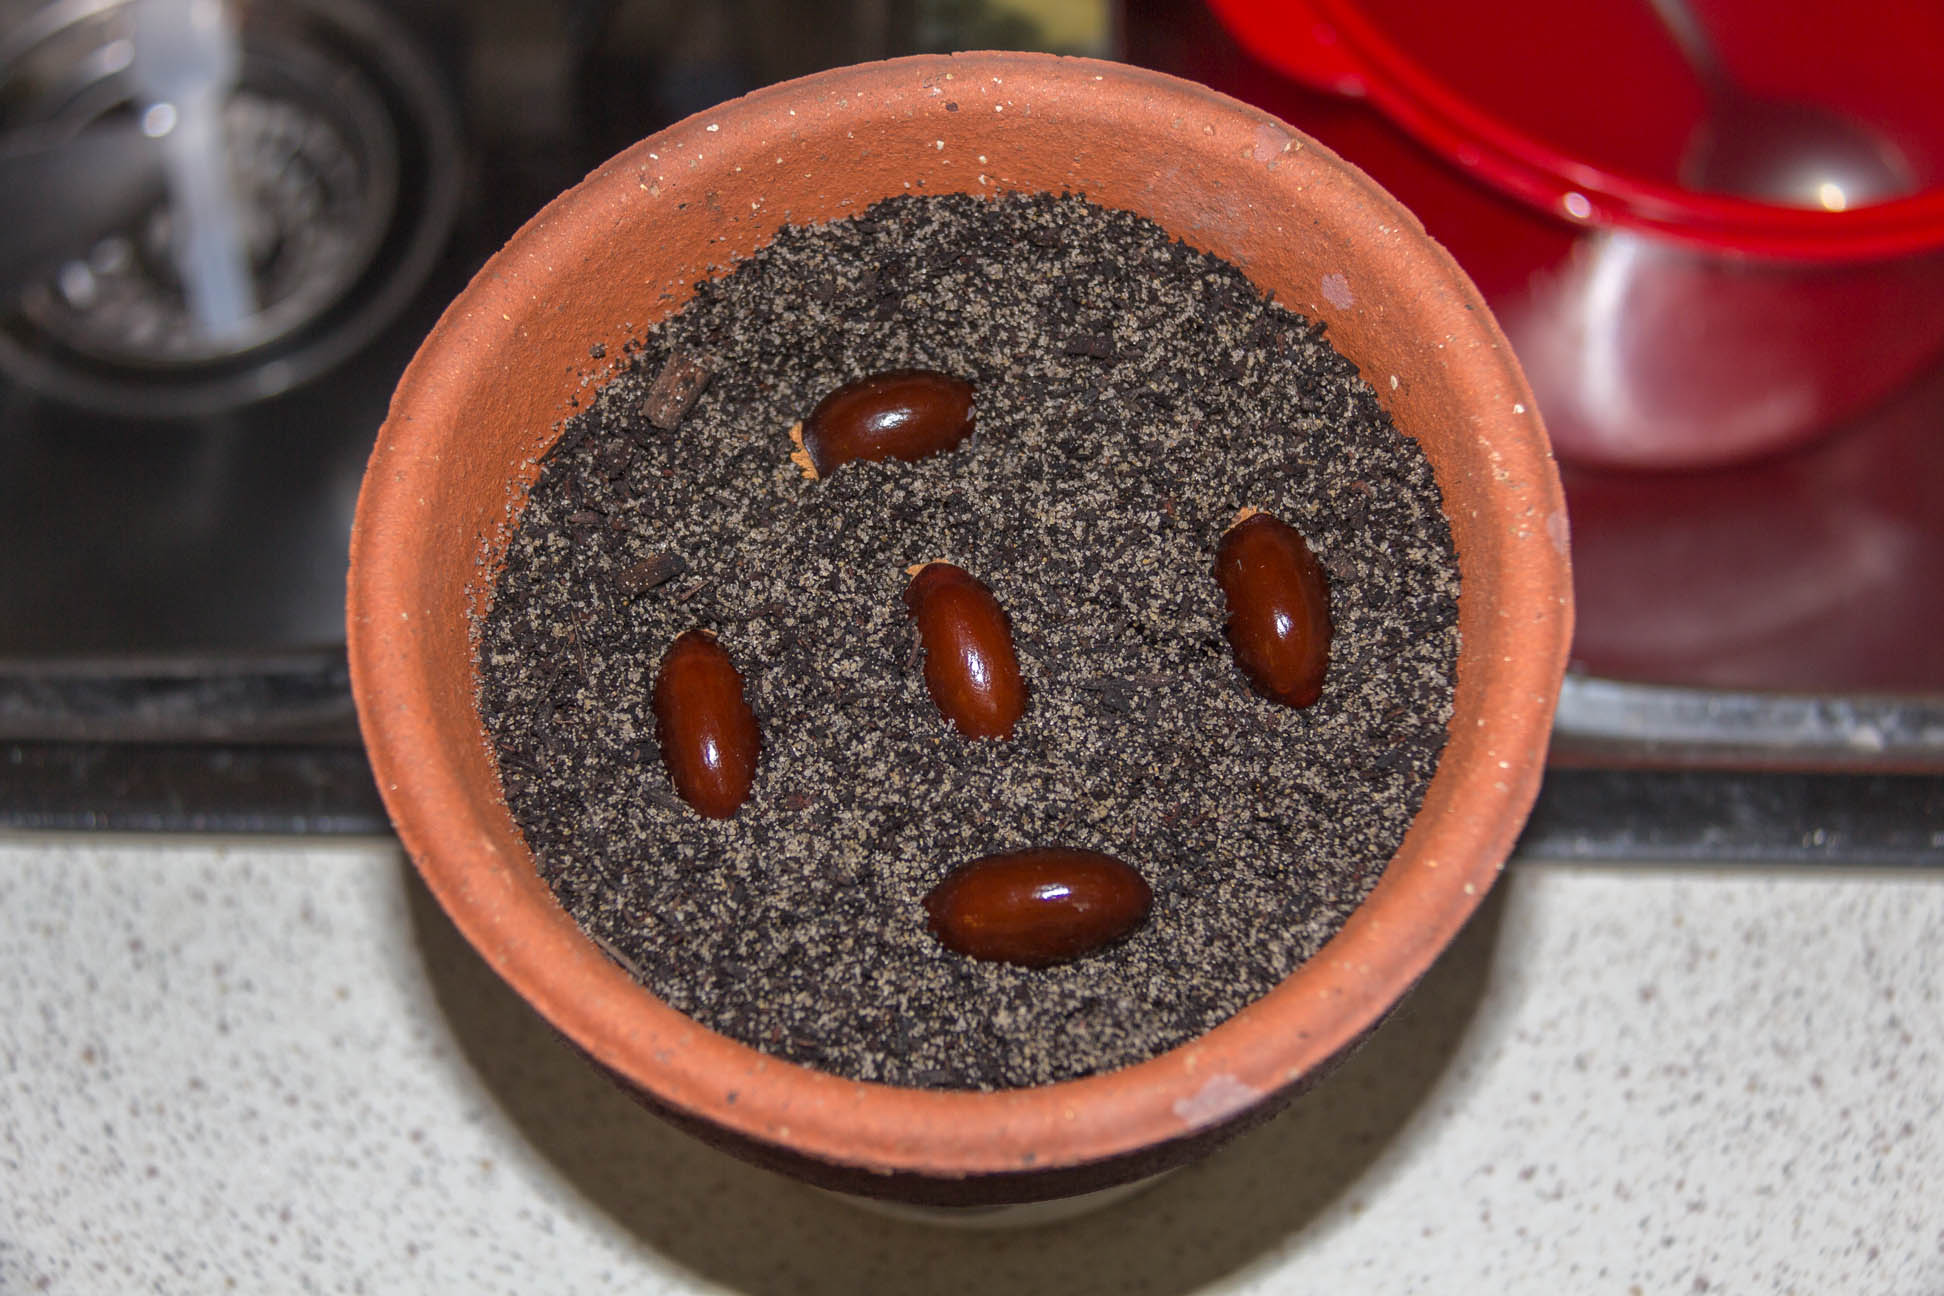 01/01/15 Day 1: Lychee seed germination experimentation Put fresh seeds straight into soil